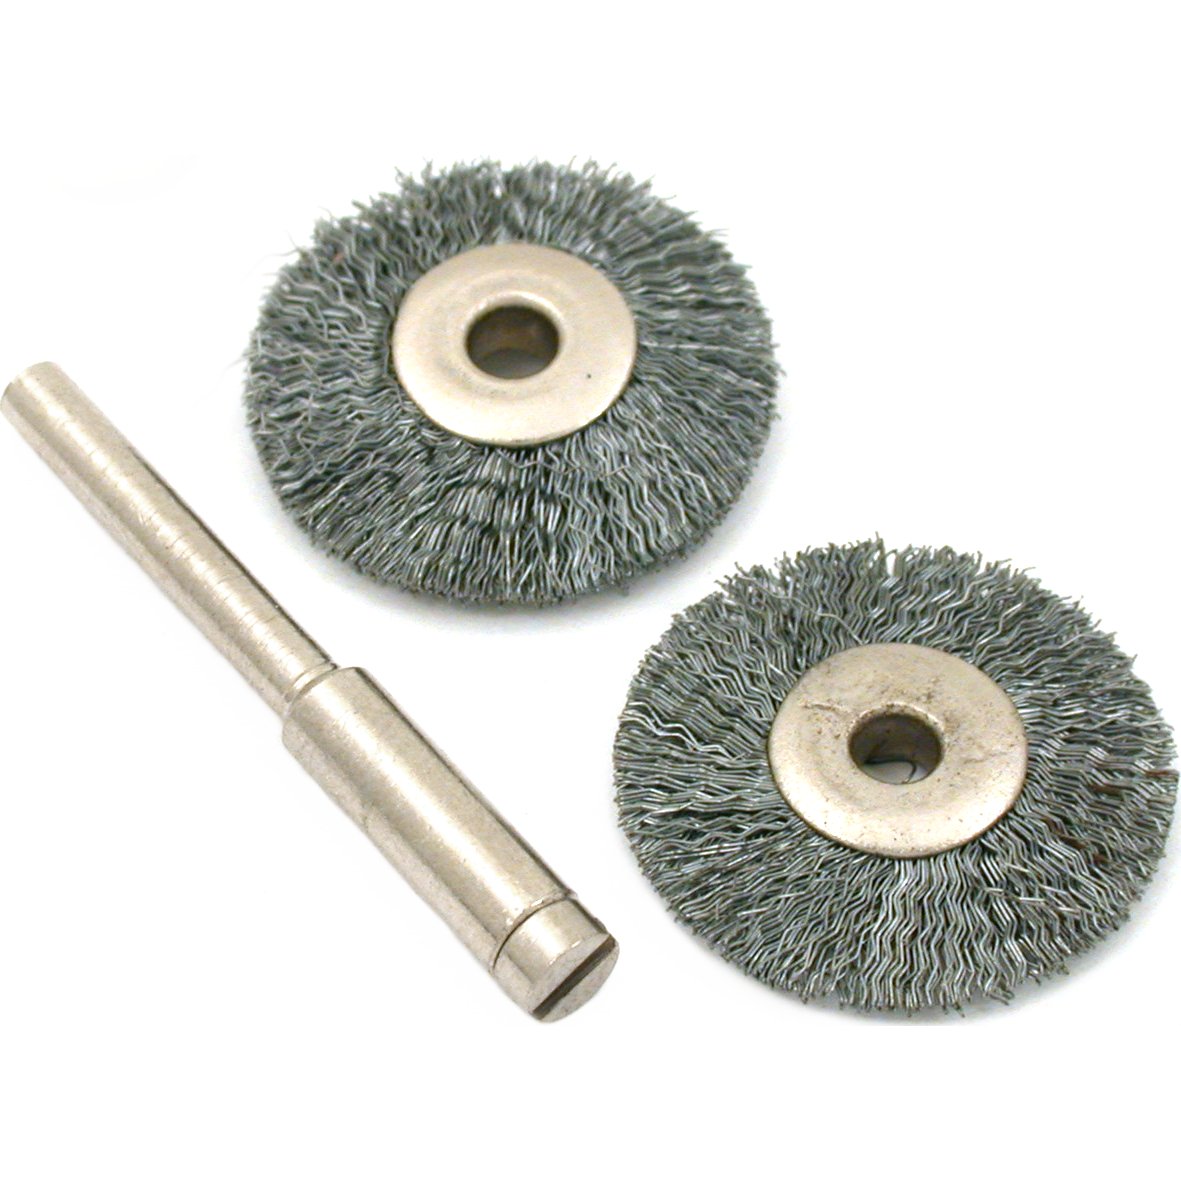 Findingking Two 7/8" Steel Wire Wheel Brushes